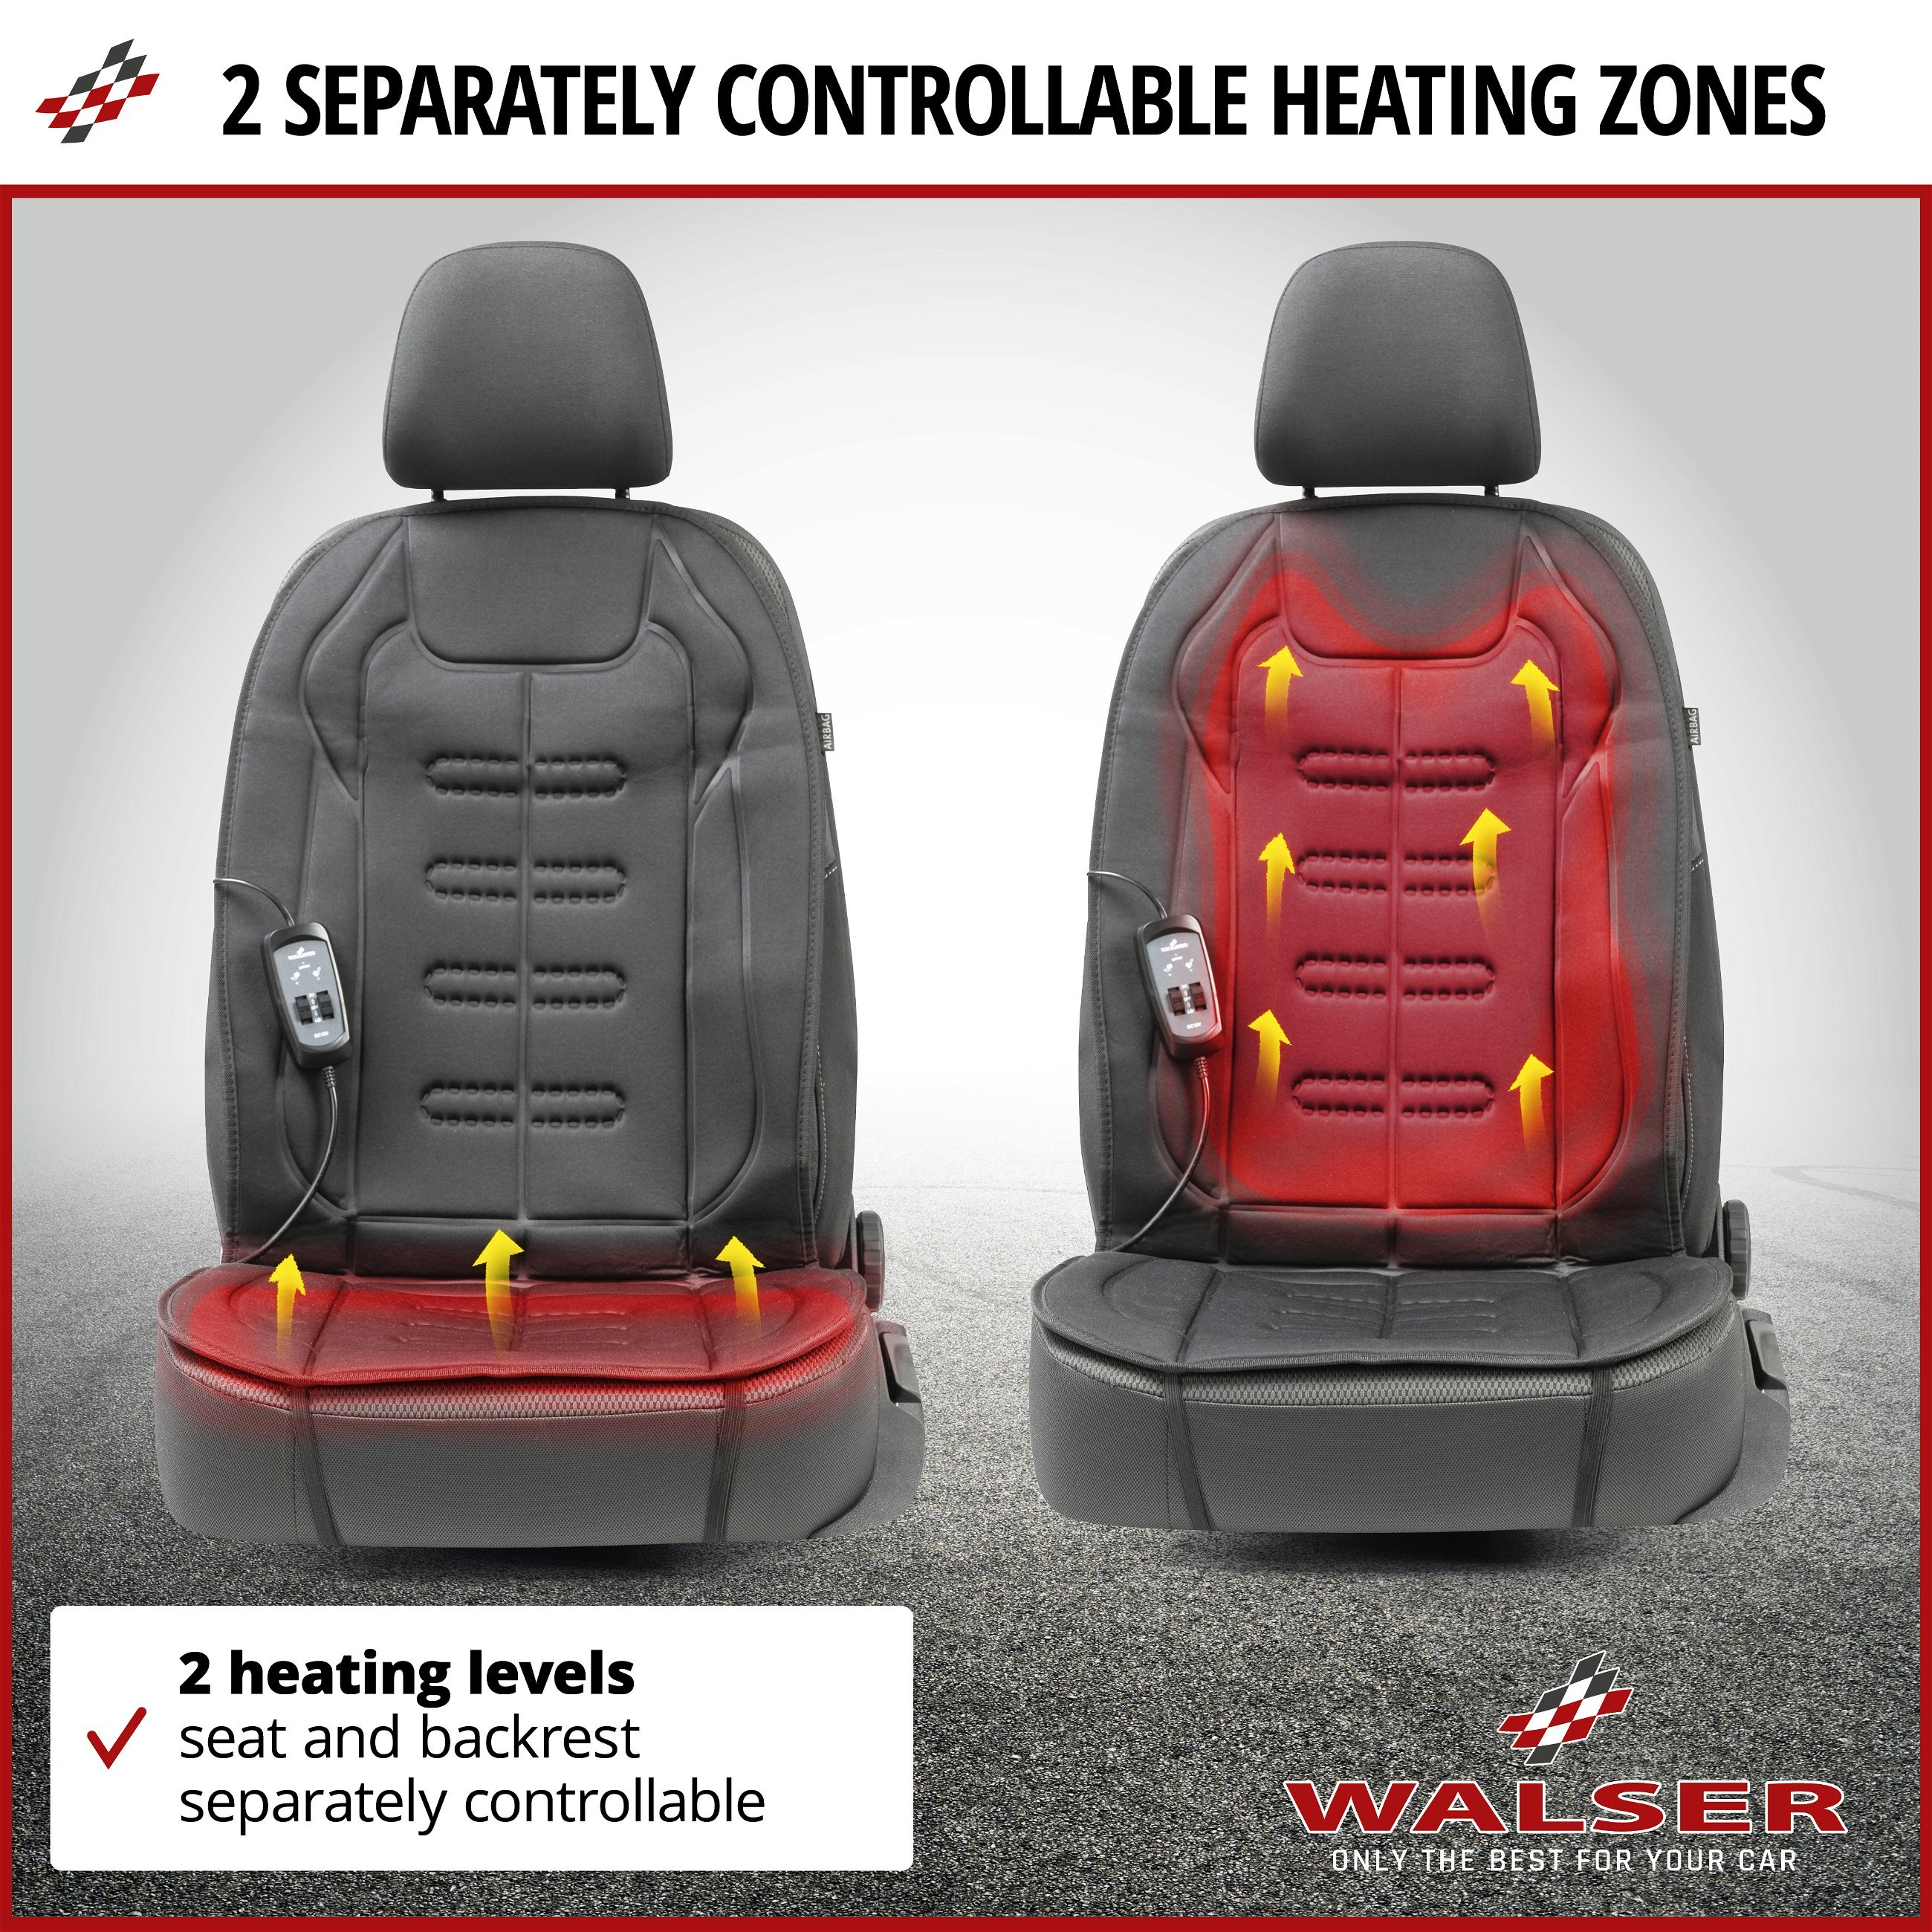 Premium heated seat cover, model Caldo - seat backrest & seat surface individually heatable, 2 heating levels selectable, car seat heating with 12-volt plug